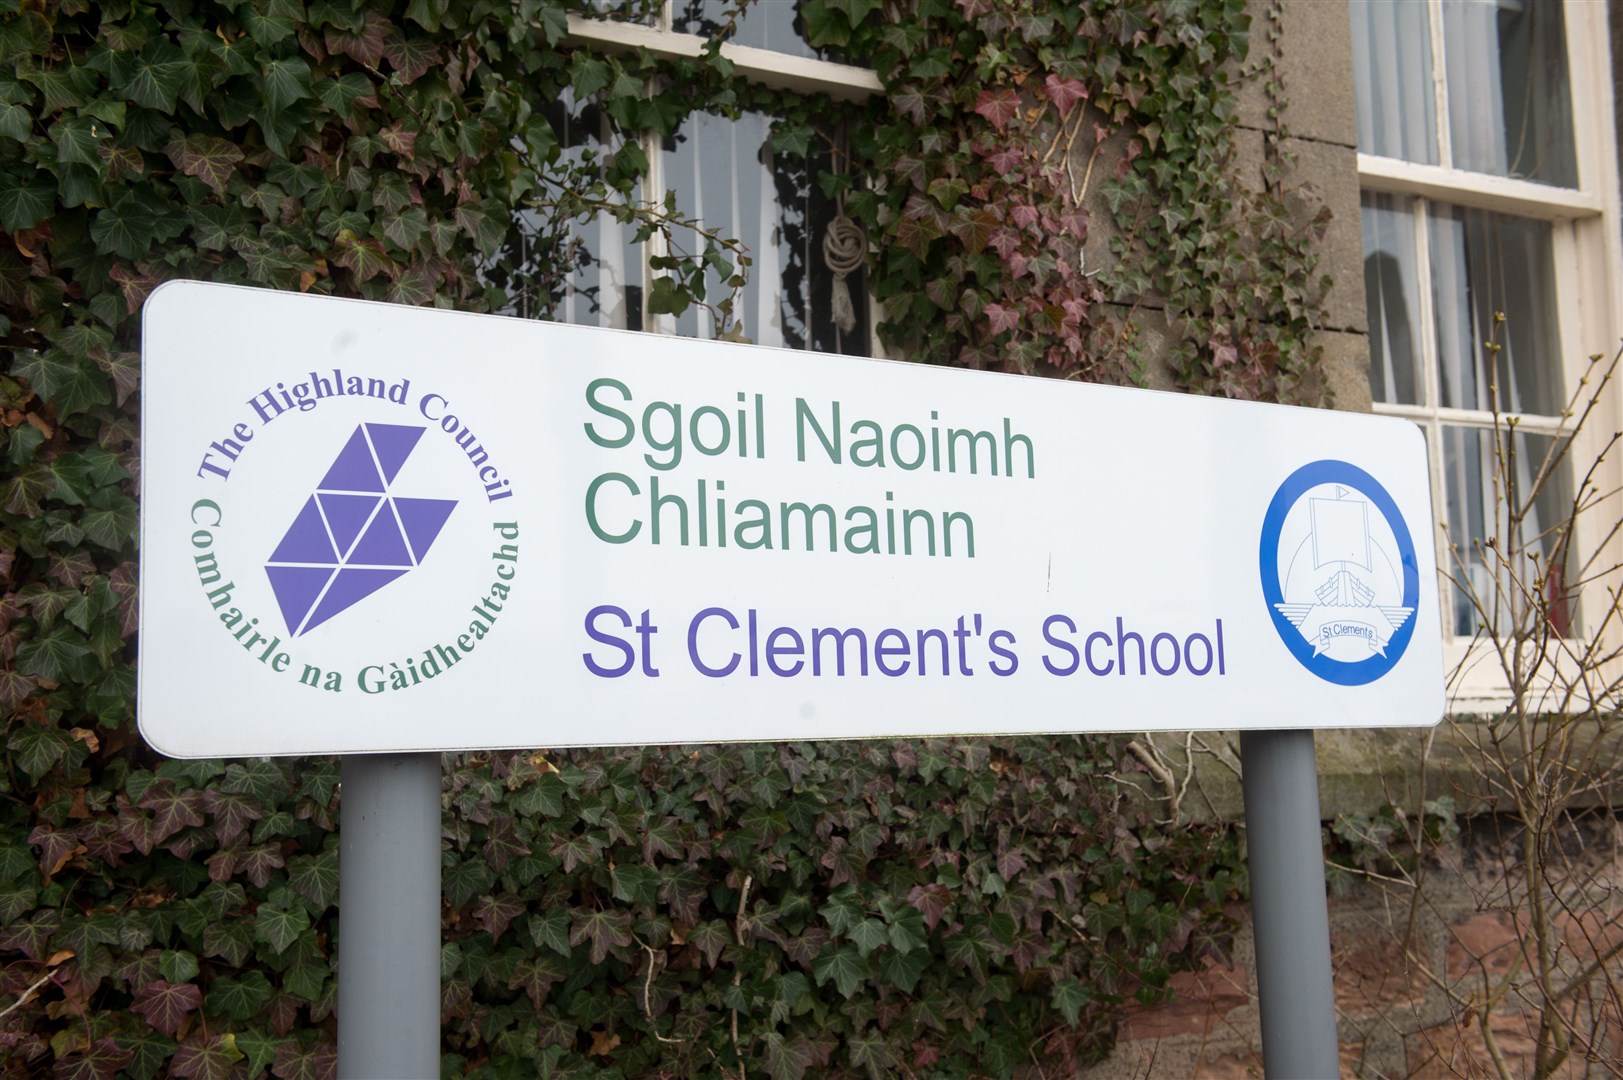 Staff at St Clement's School in Dingwall have been praised for doing an amazing job in a building described as 'unfit for purpose'.